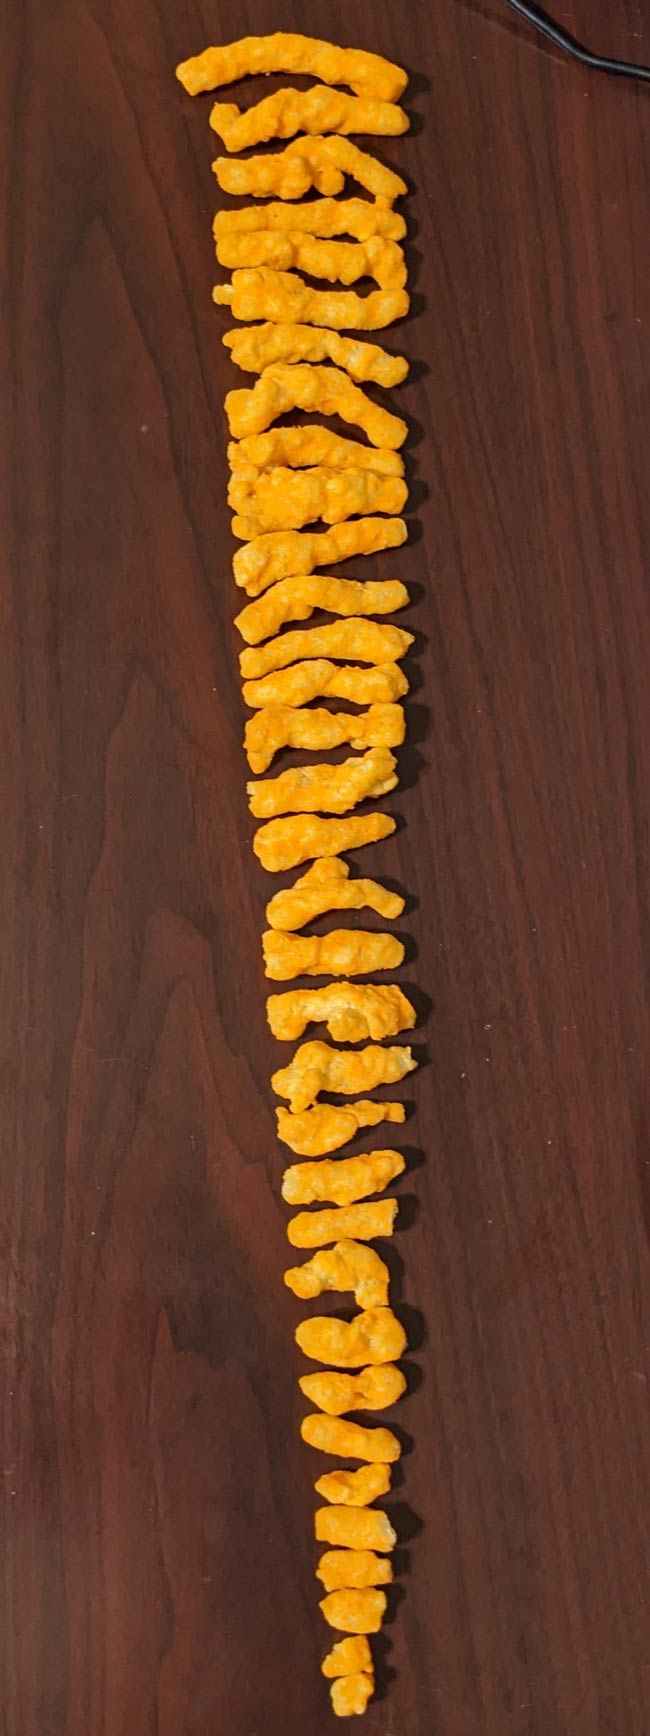 By the powers of procrastinating, I sorted my Cheetos from largest to smallest